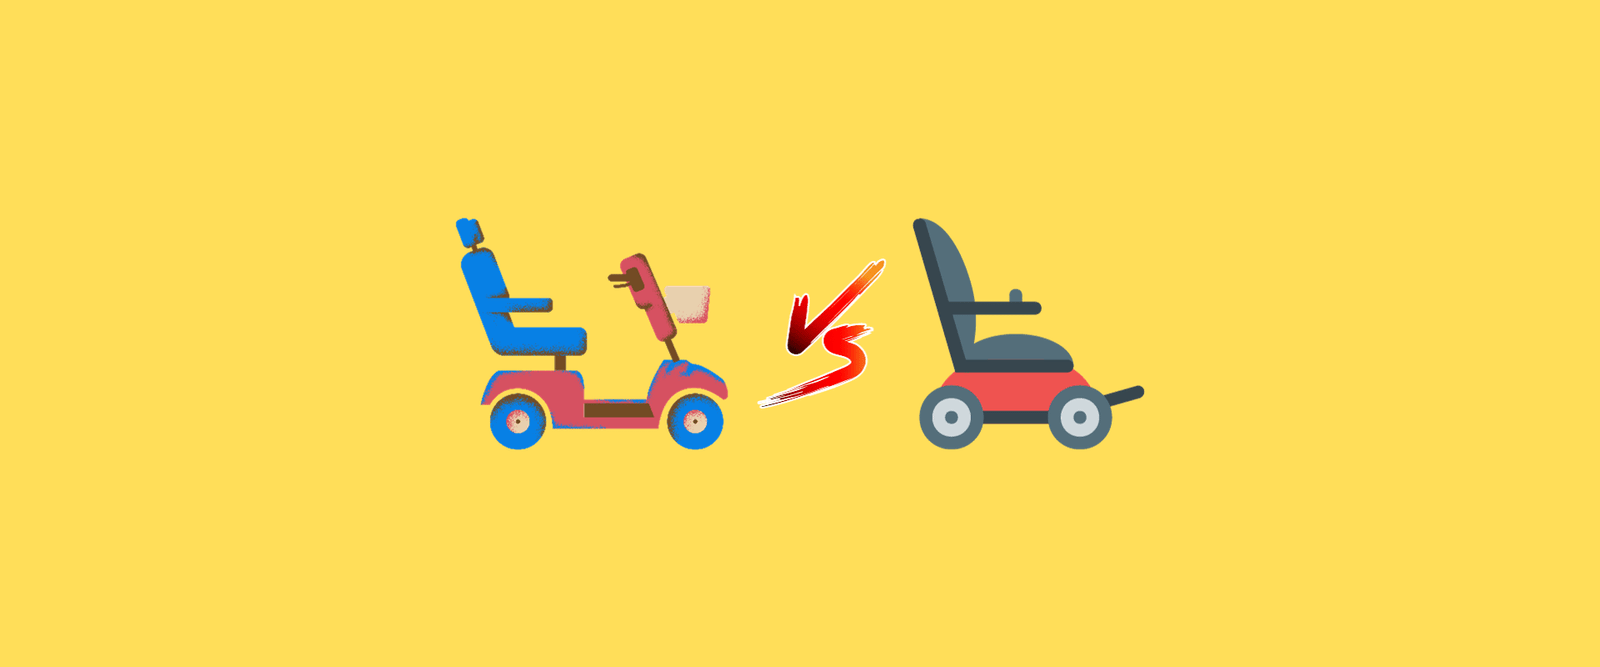 Electric Wheelchairs vs. Mobility Scooters